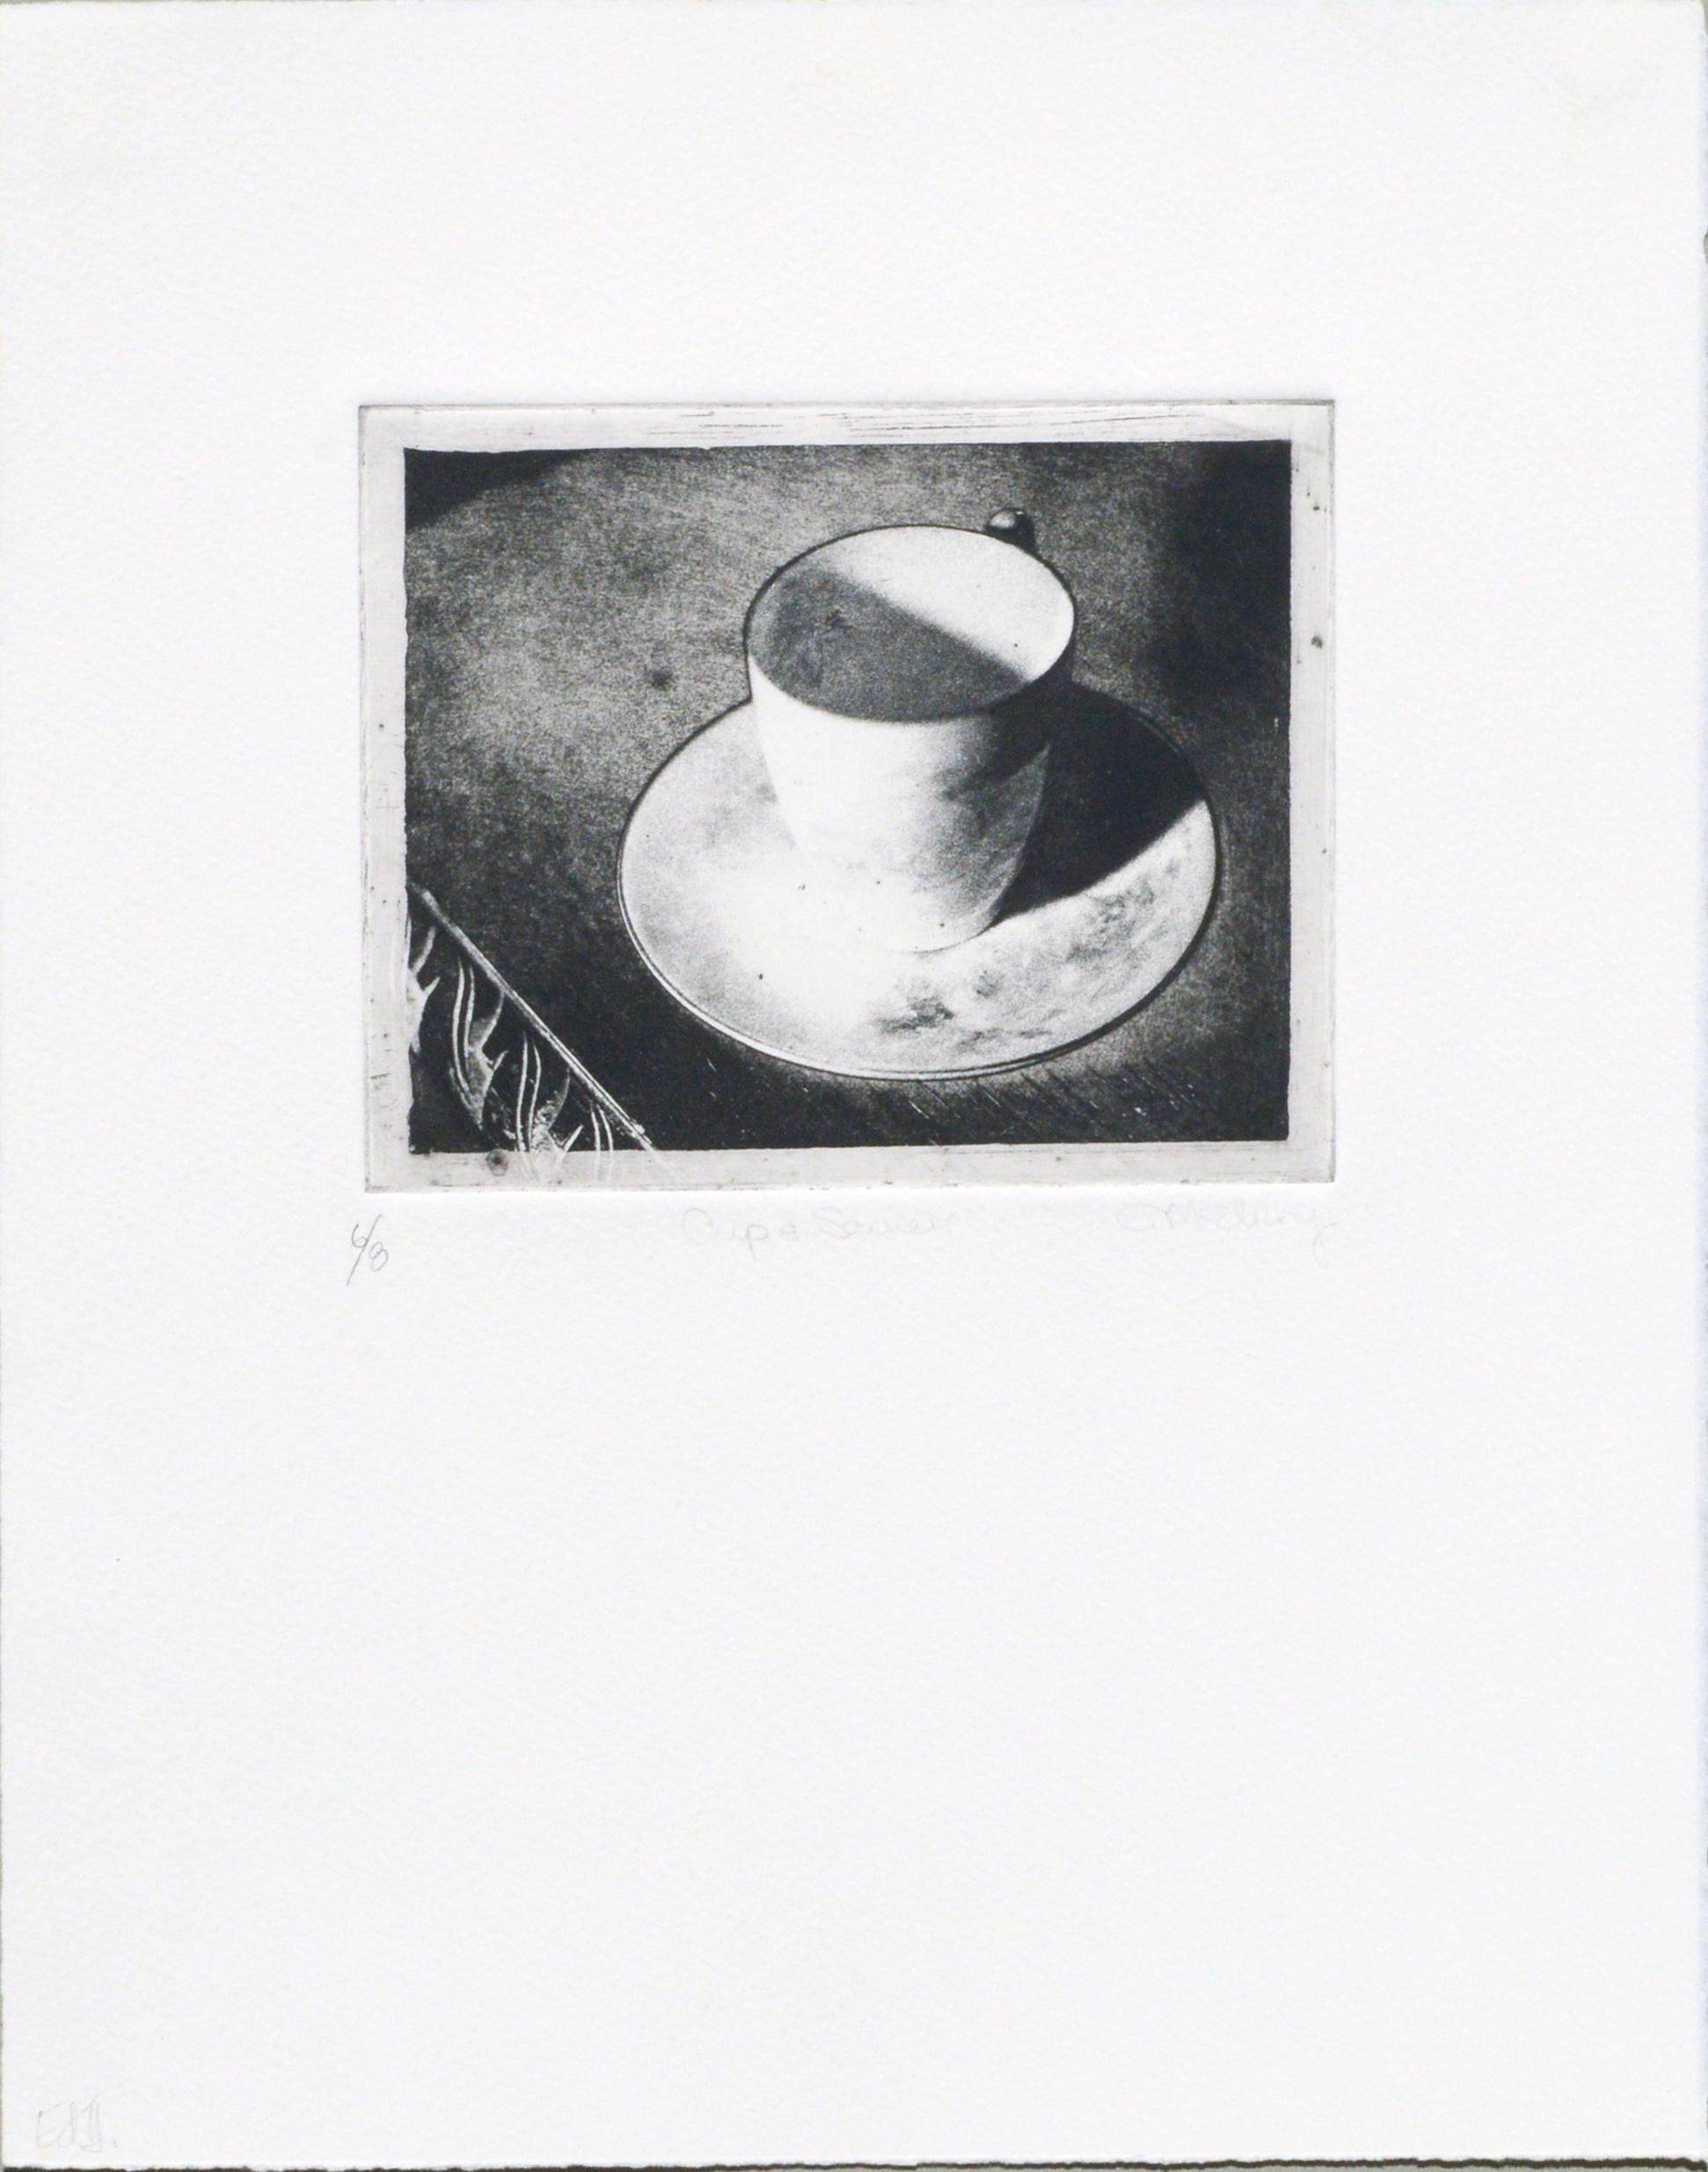 Cup & Saucer (Grandmother's Artifacts), Photo Etching Still-Life  - Print by Claudette McElroy